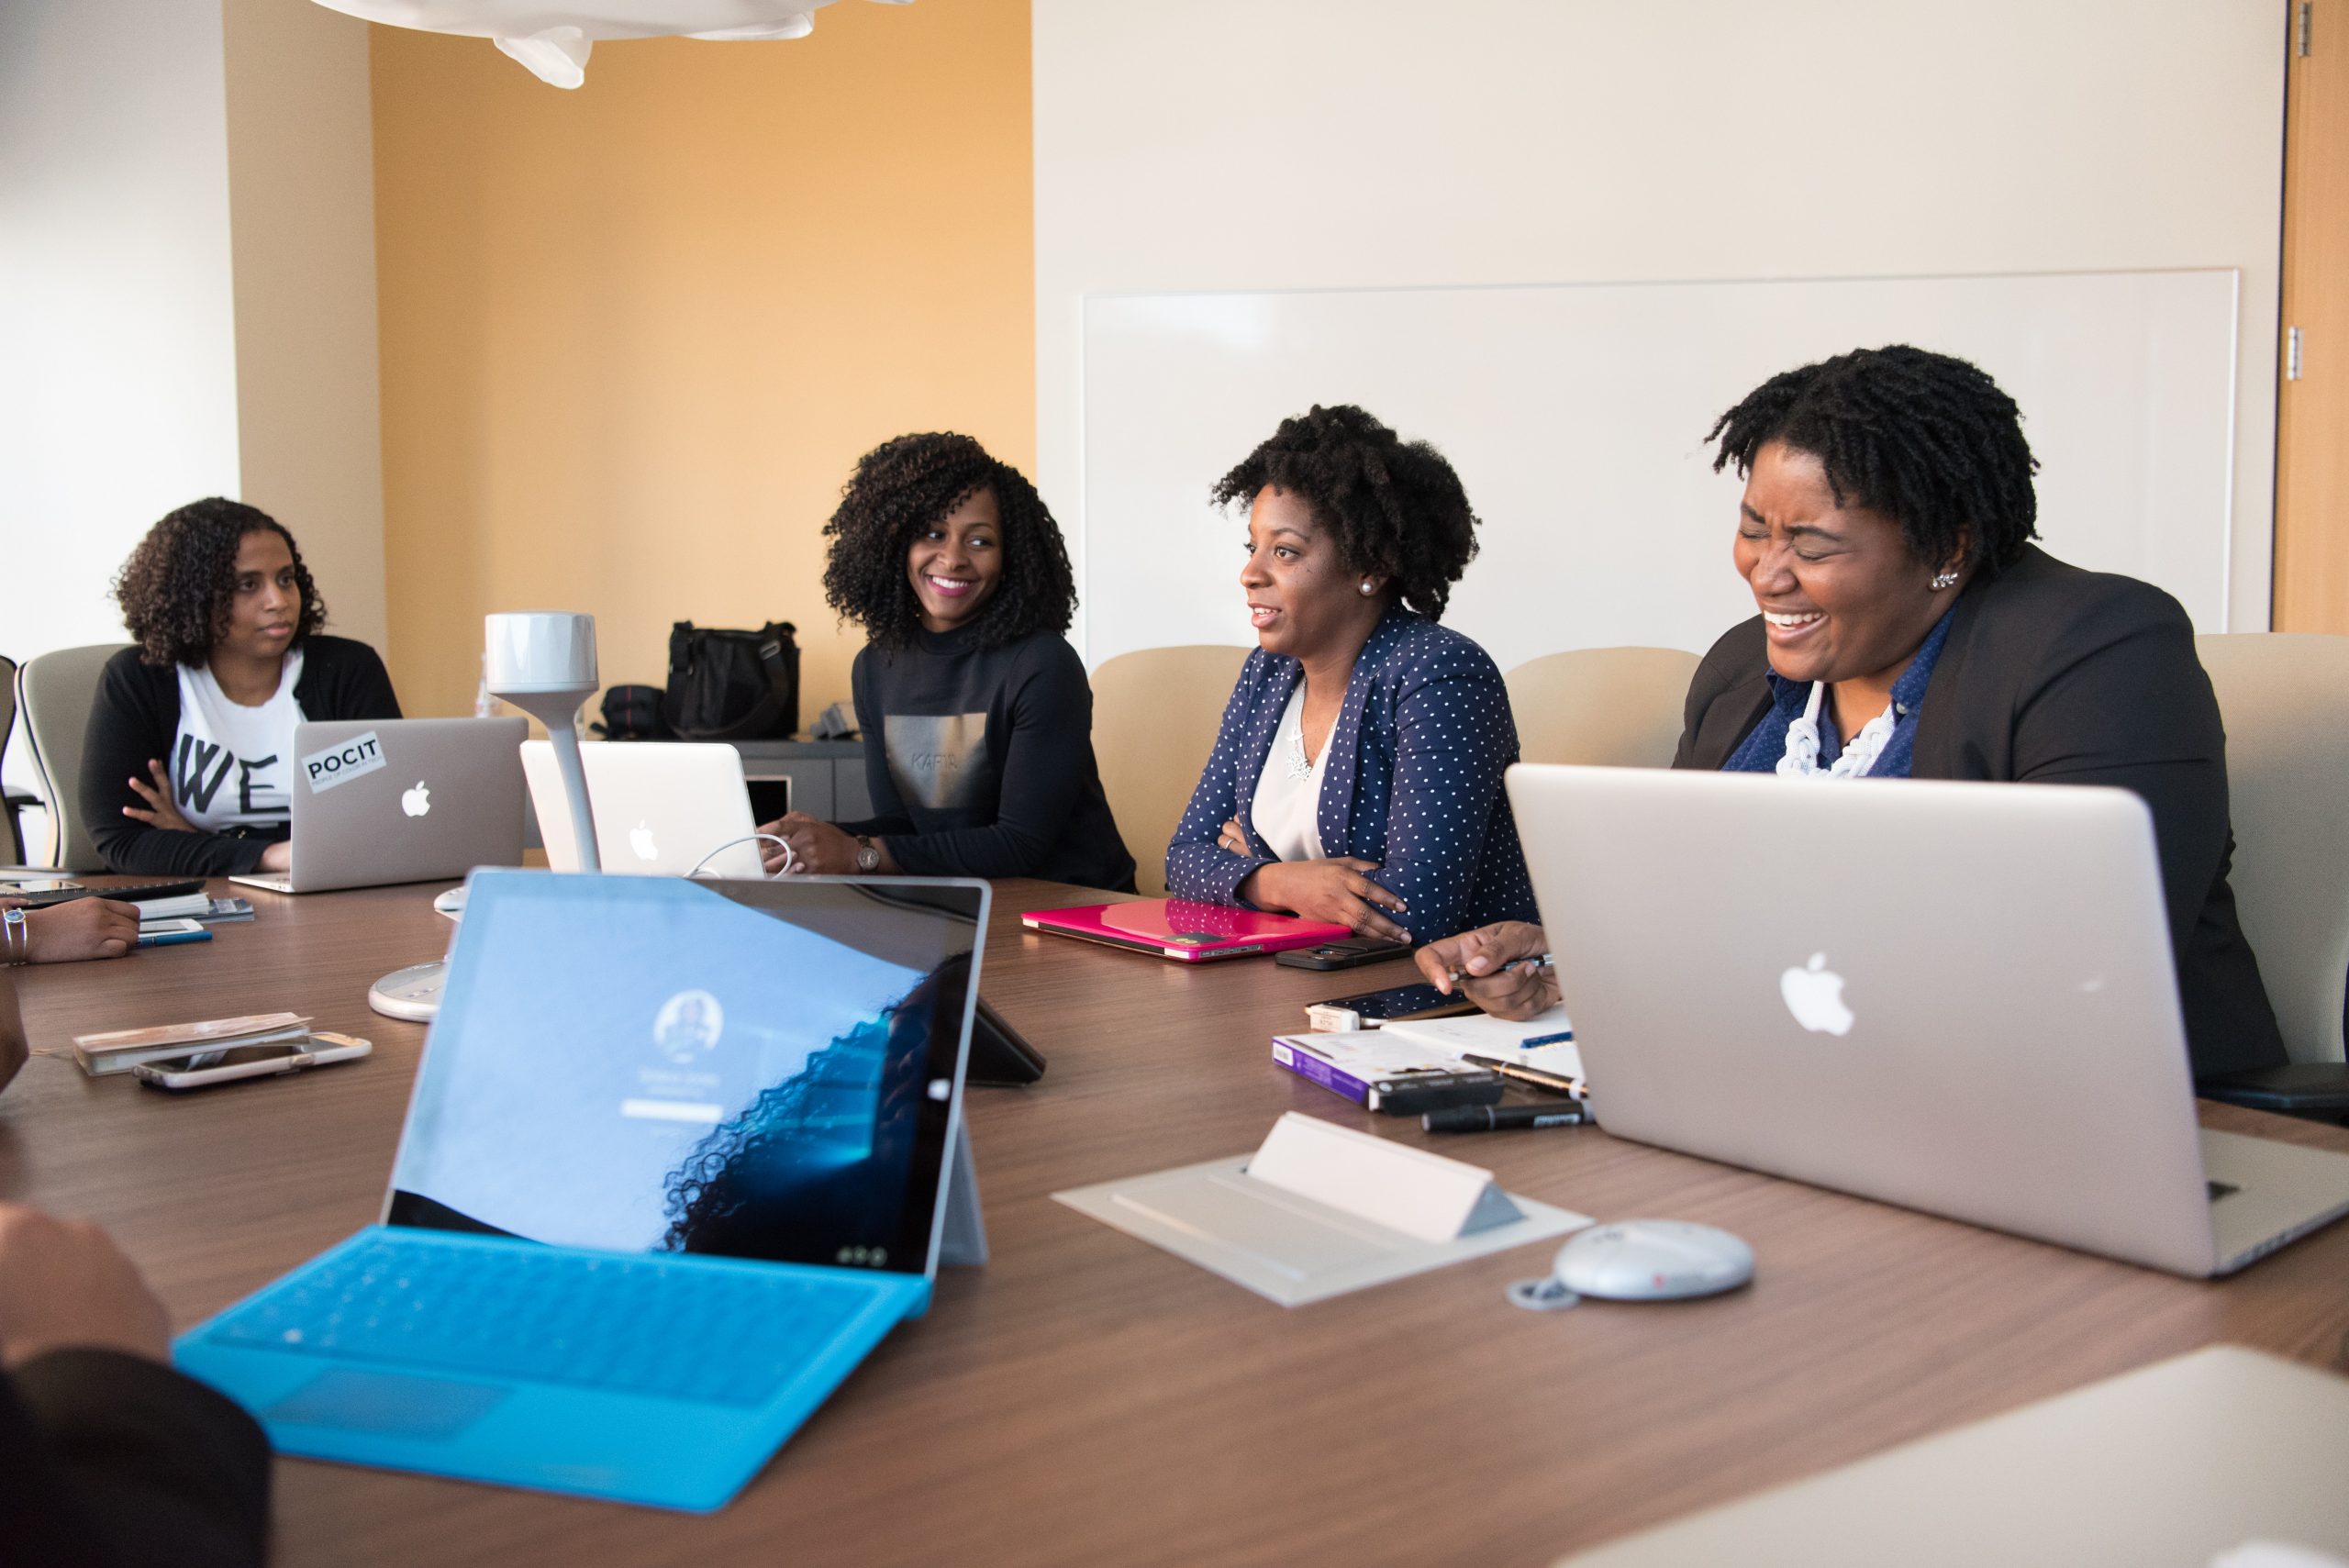 A group of Black women sit at a large office desk in a meeting